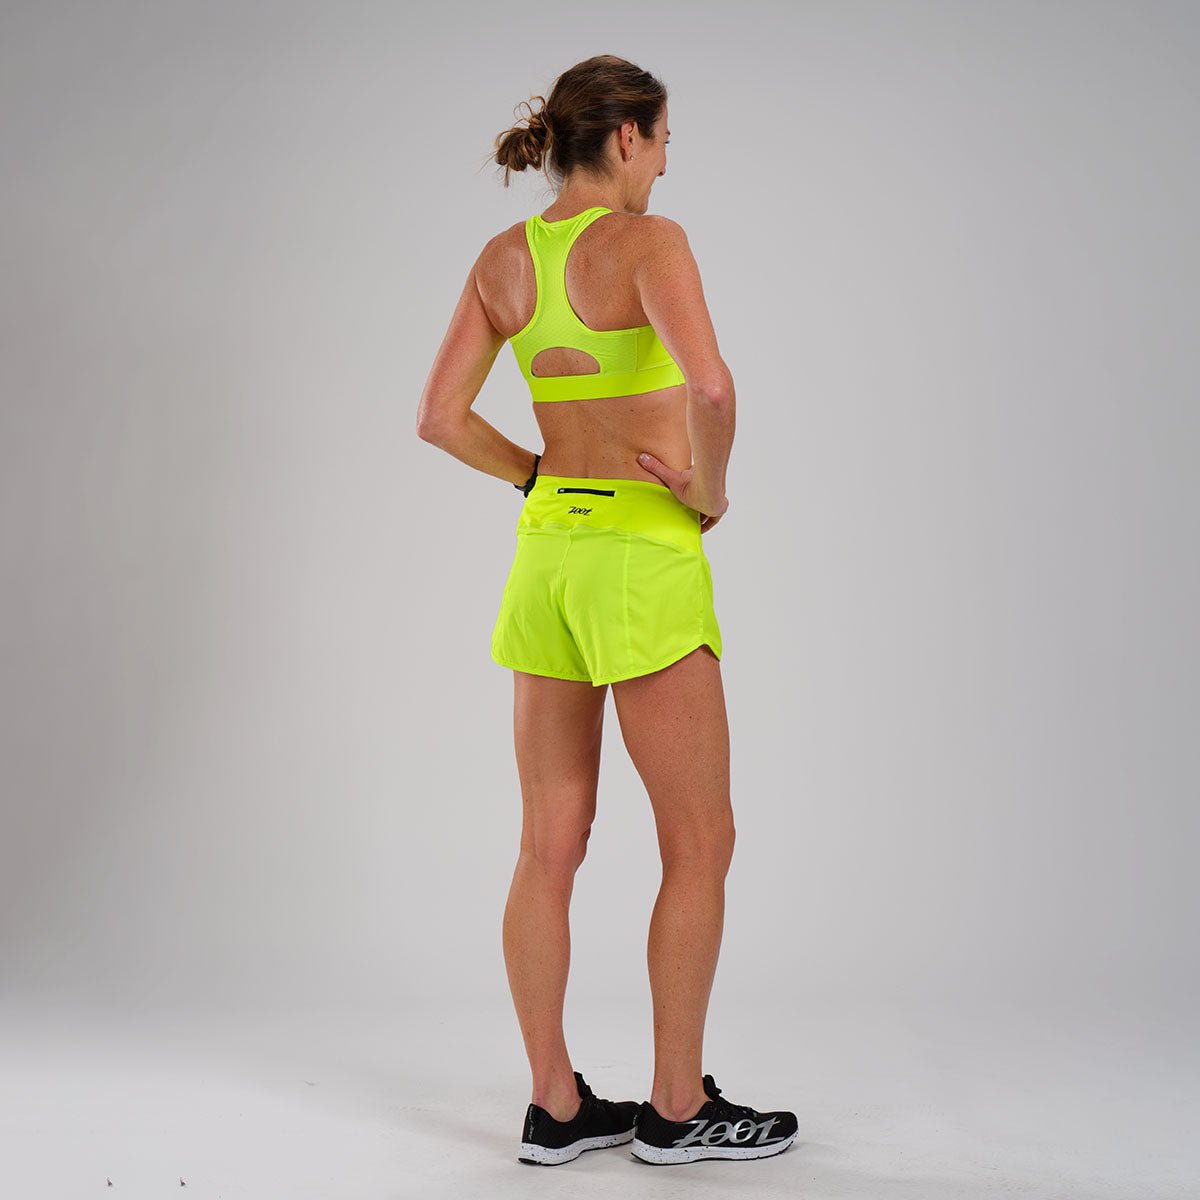 RUNNER ISLAND Womens Neon Yellow Sports Bra Hoodie High Support, Crop Top,  Strappy, and Padded at  Women's Clothing store